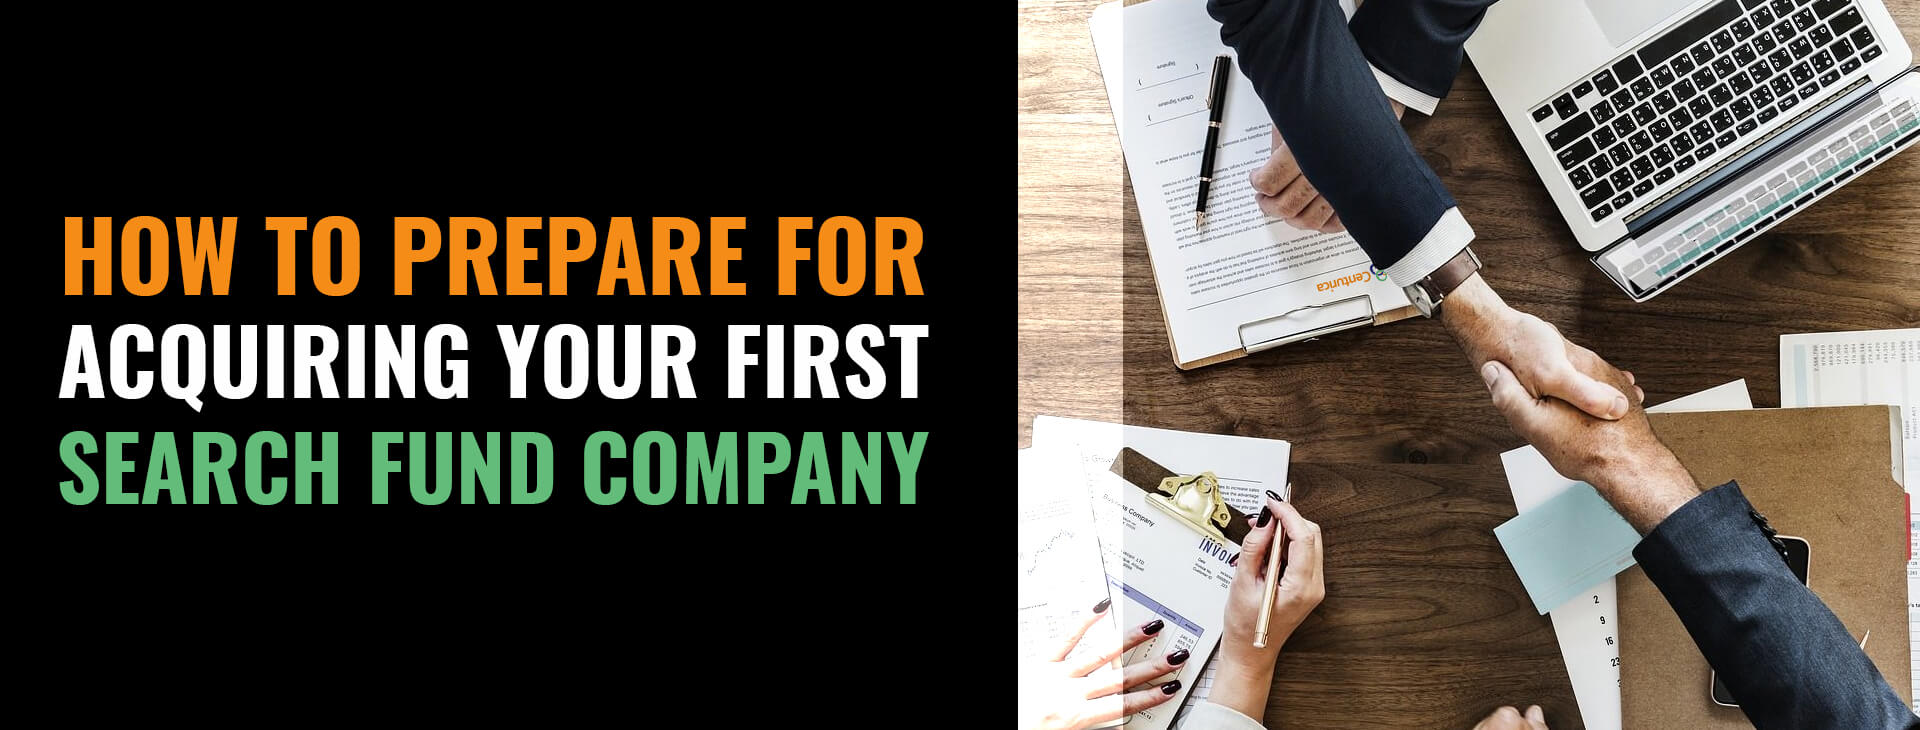 How to Prepare for Acquiring Your First Search Fund Company